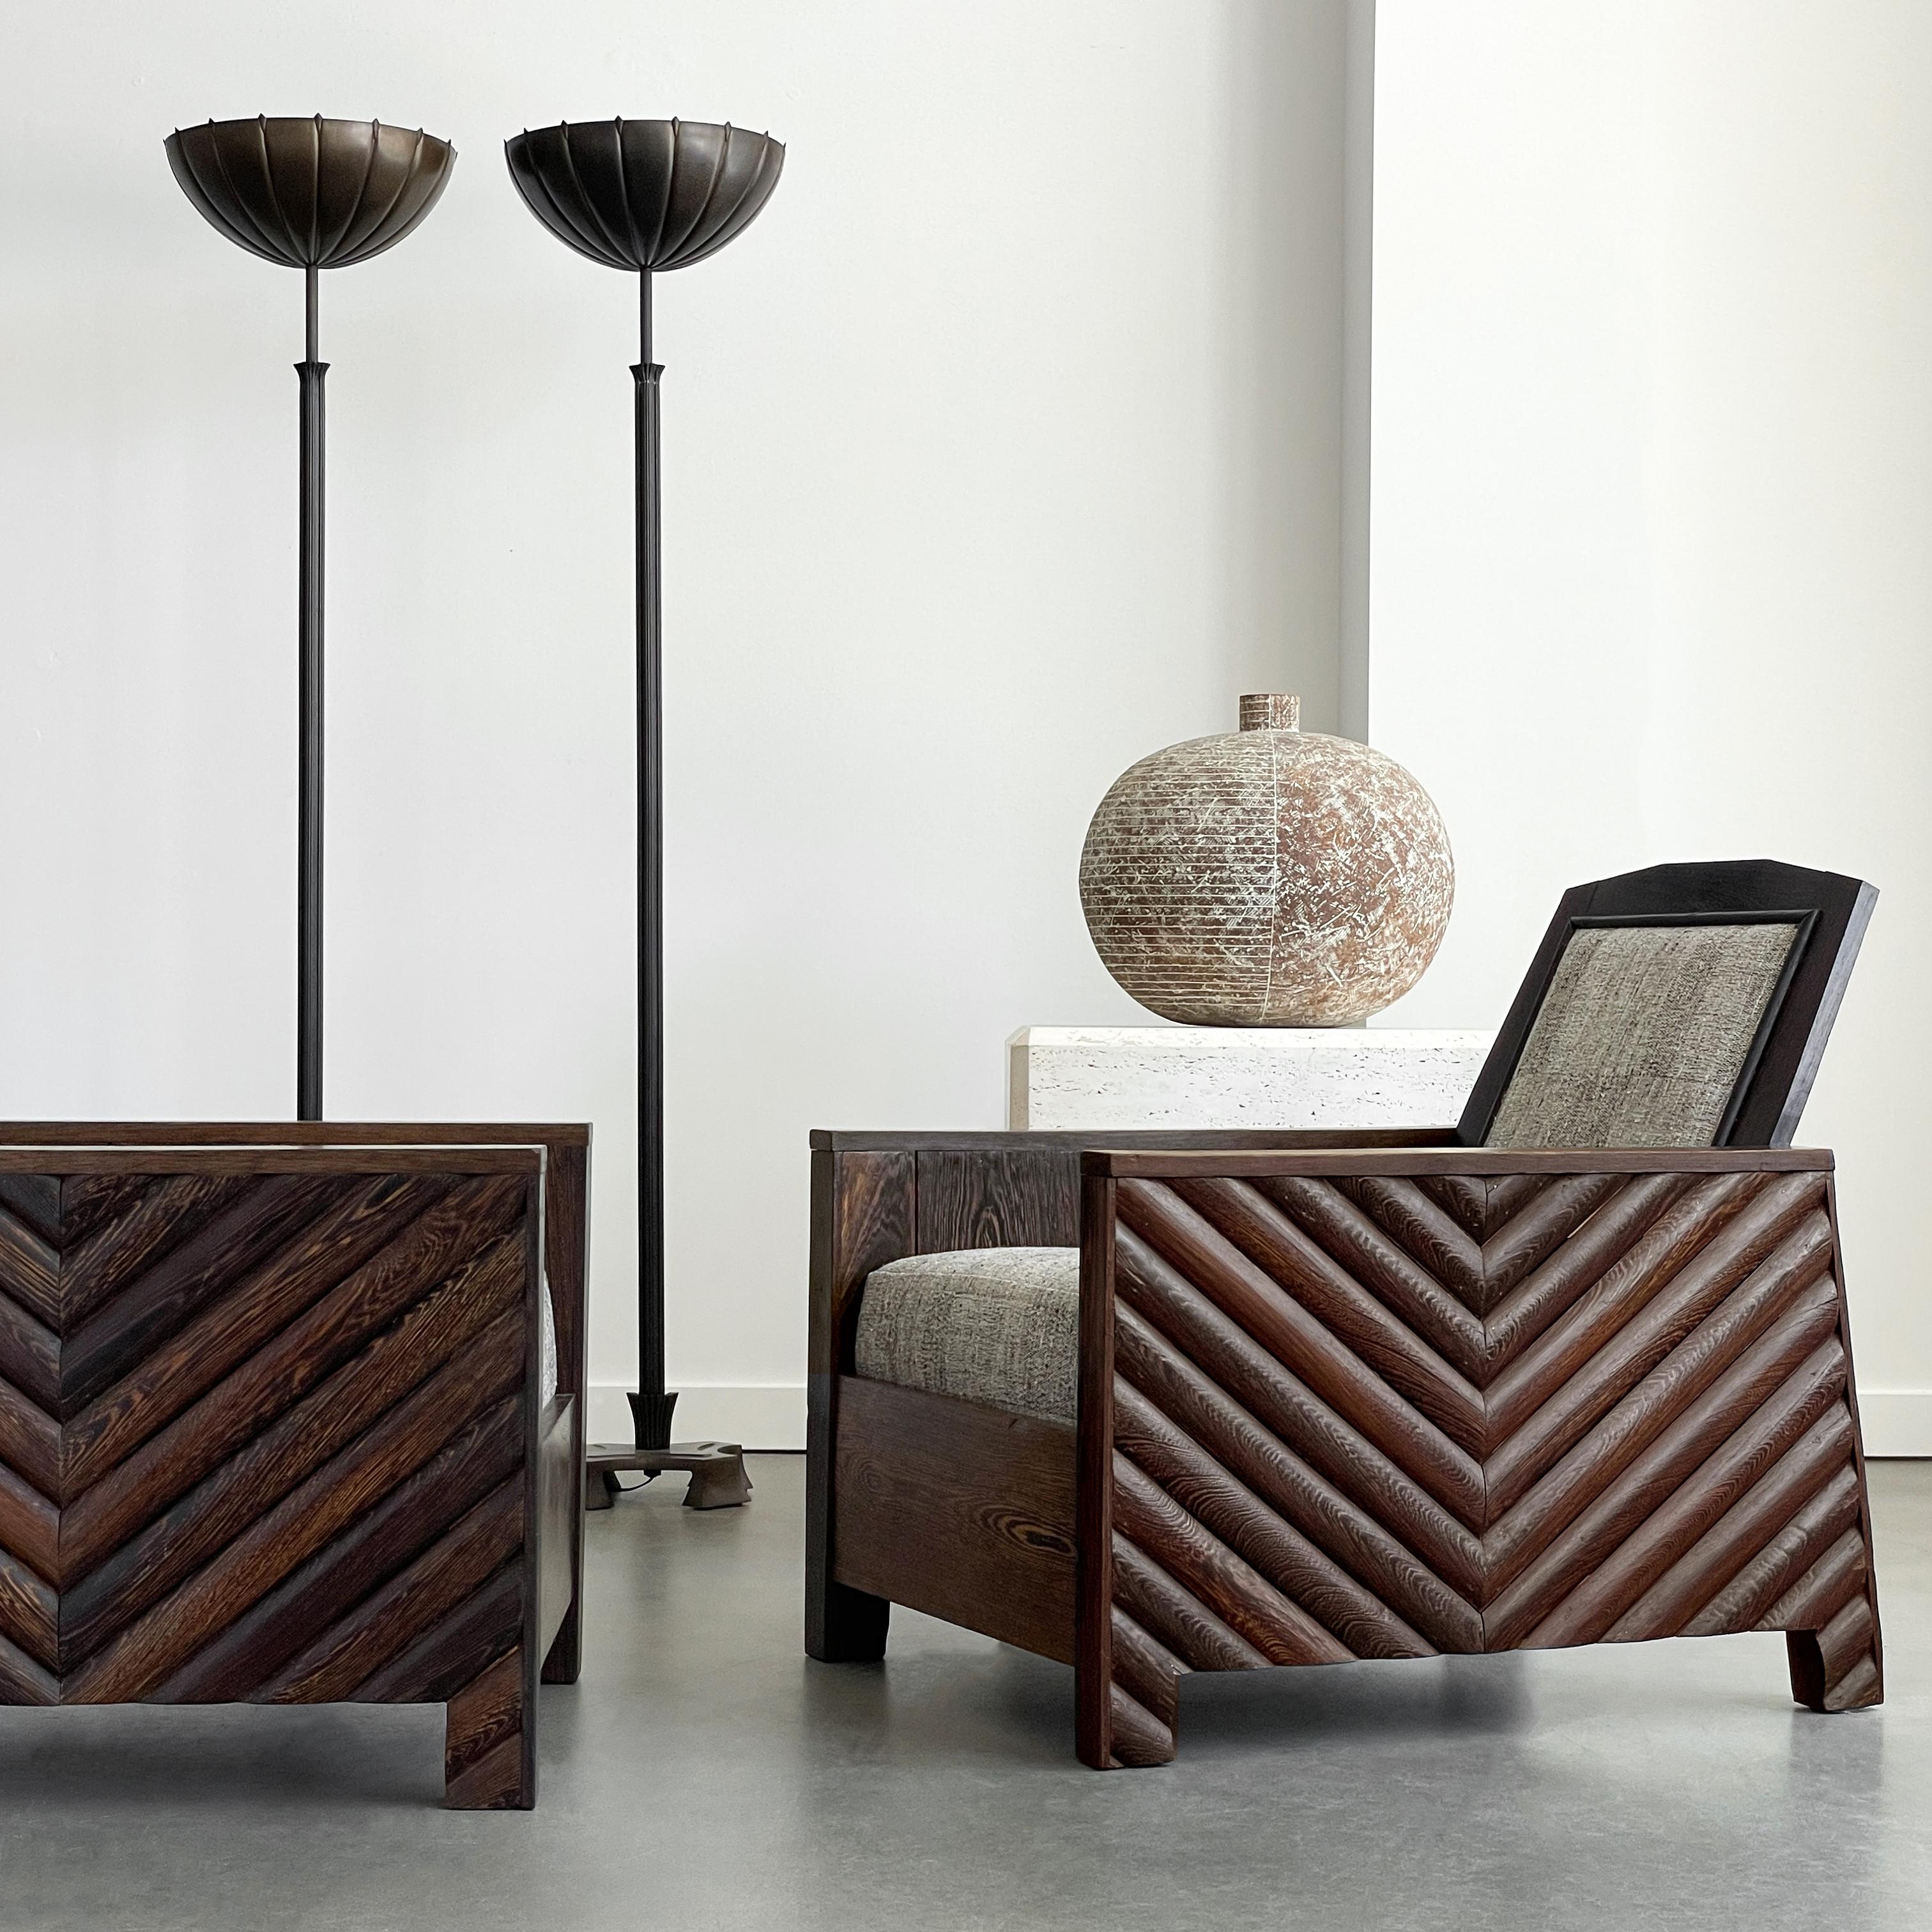 A rare and exquisite pair of hand-crafted Scandinavian Modernist/Art Deco club lounge chairs, circa 1920s. These solid wenge wood chairs, possibly one of a kind, offer a unique blend of minimalist design and rustic charm, making them a sophisticated